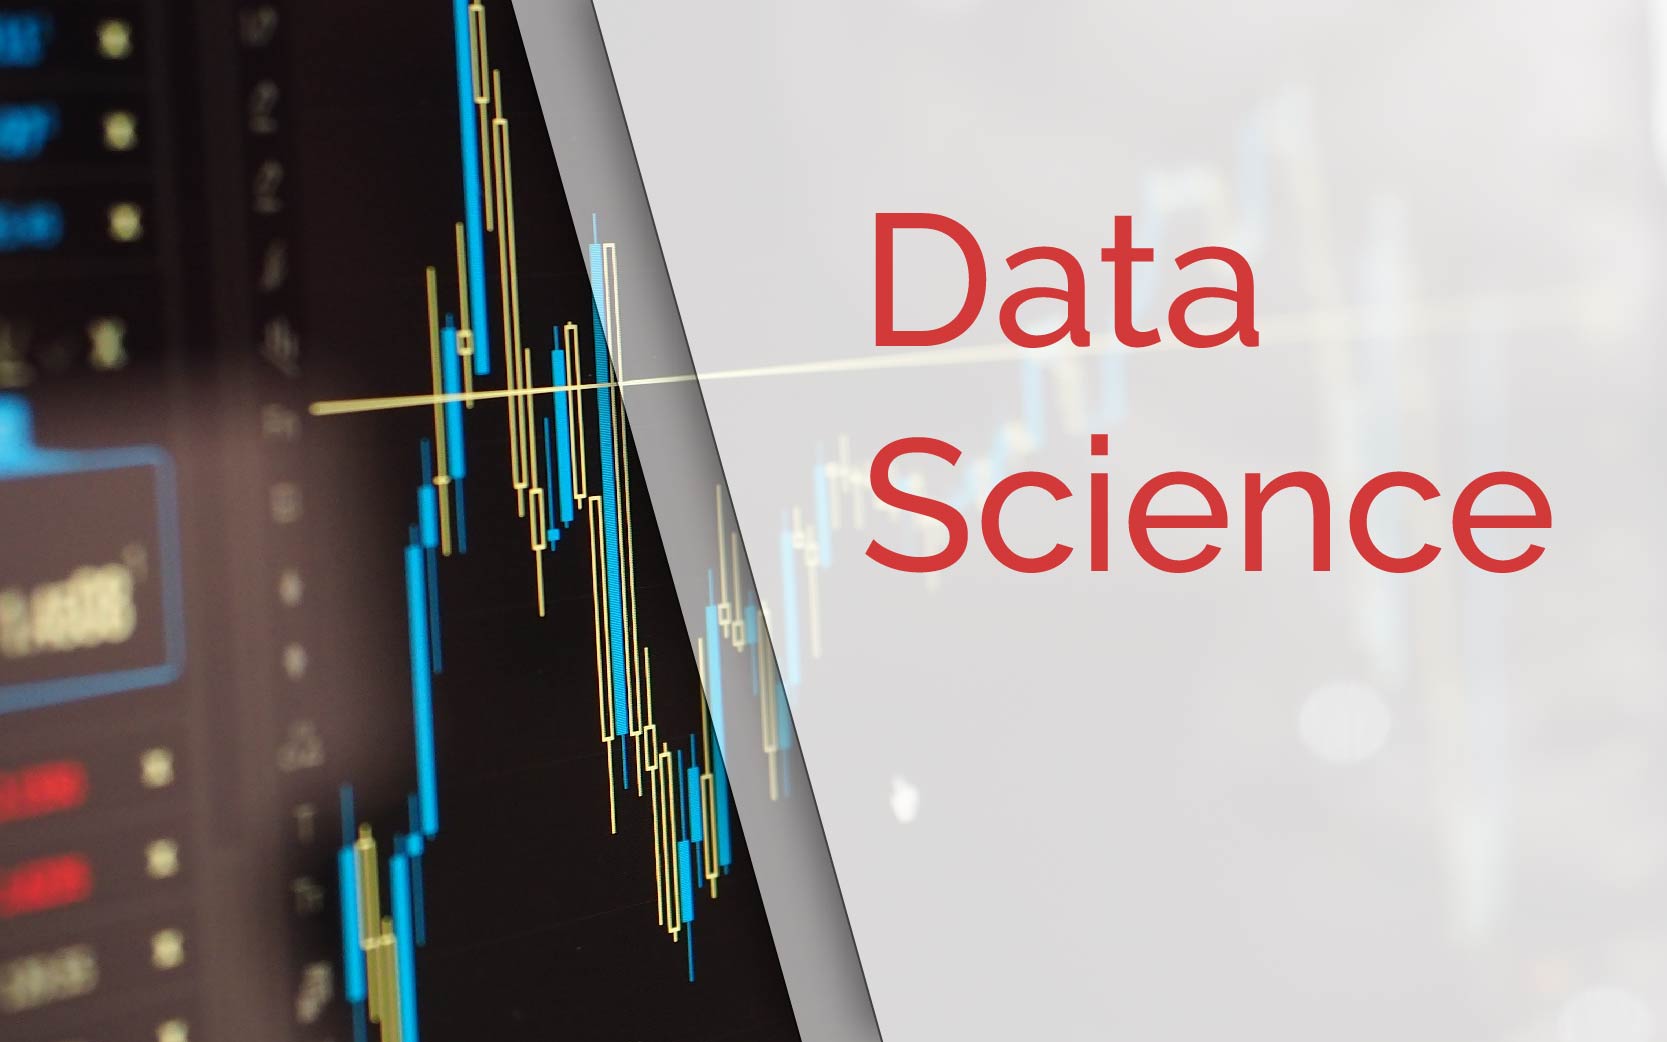 Data Science using R-training-in-bangalore-by-zekelabs